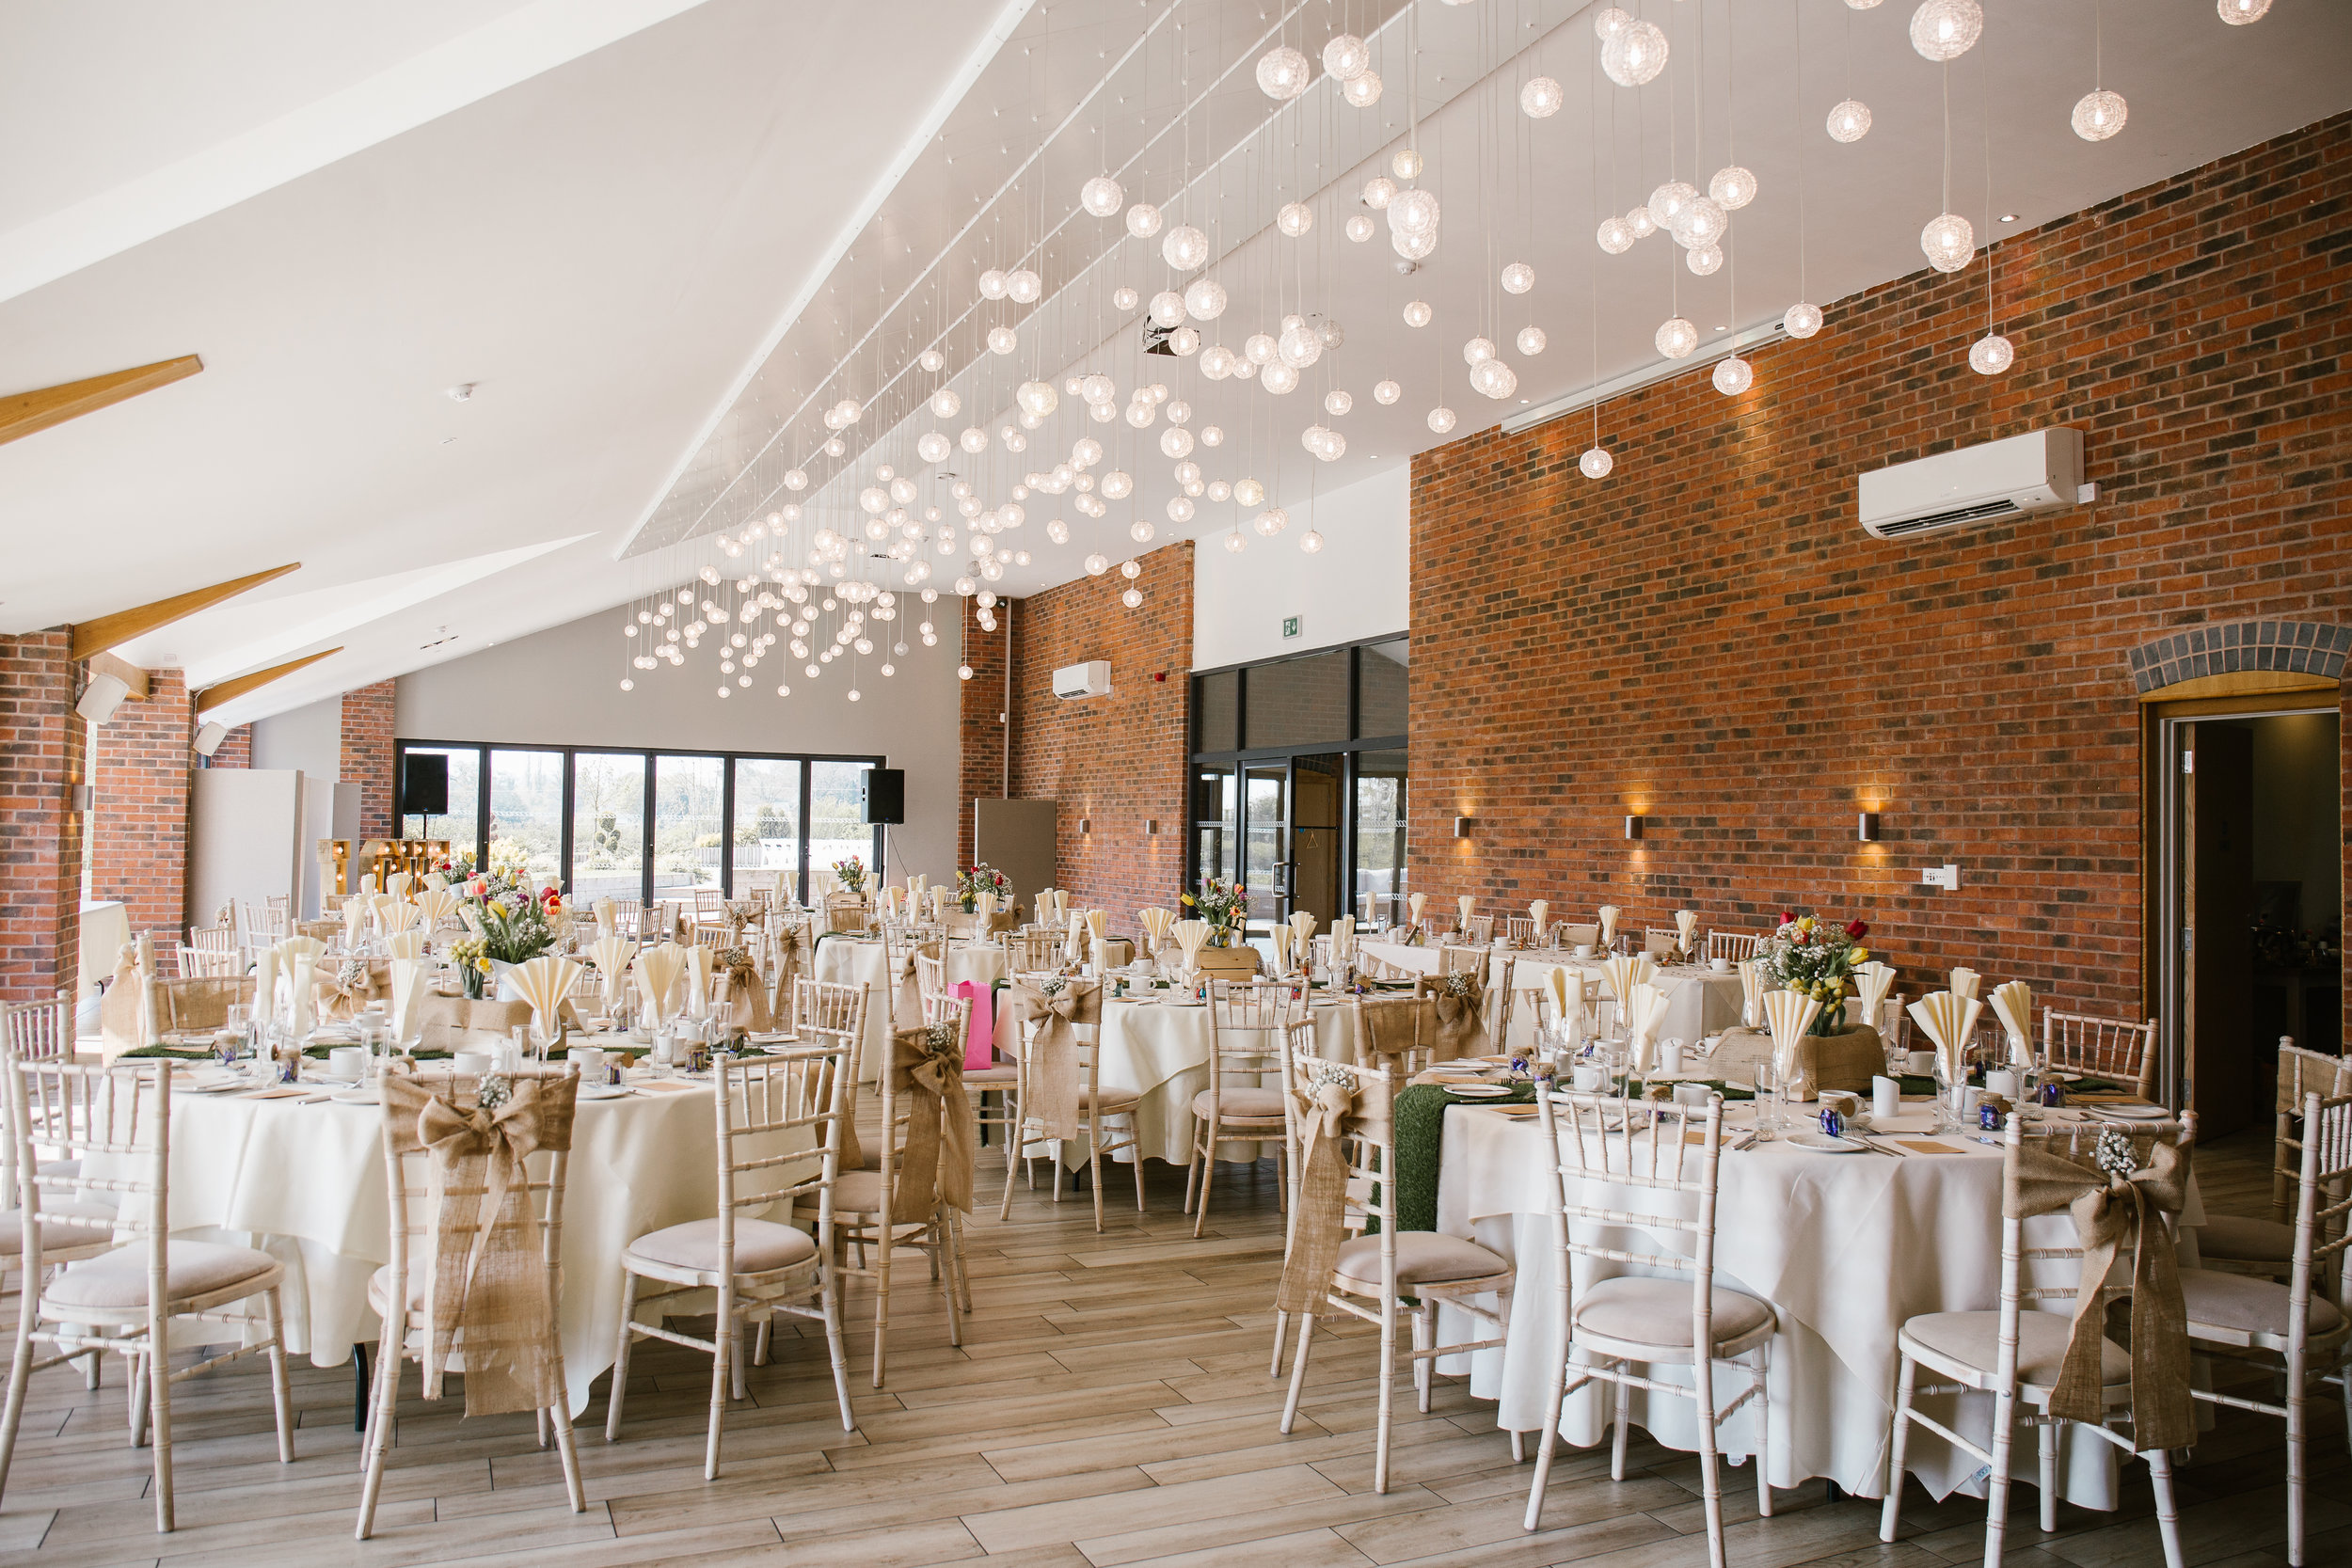 wedding breakfast room set up at the boat house aston marina for a spring themed wedding